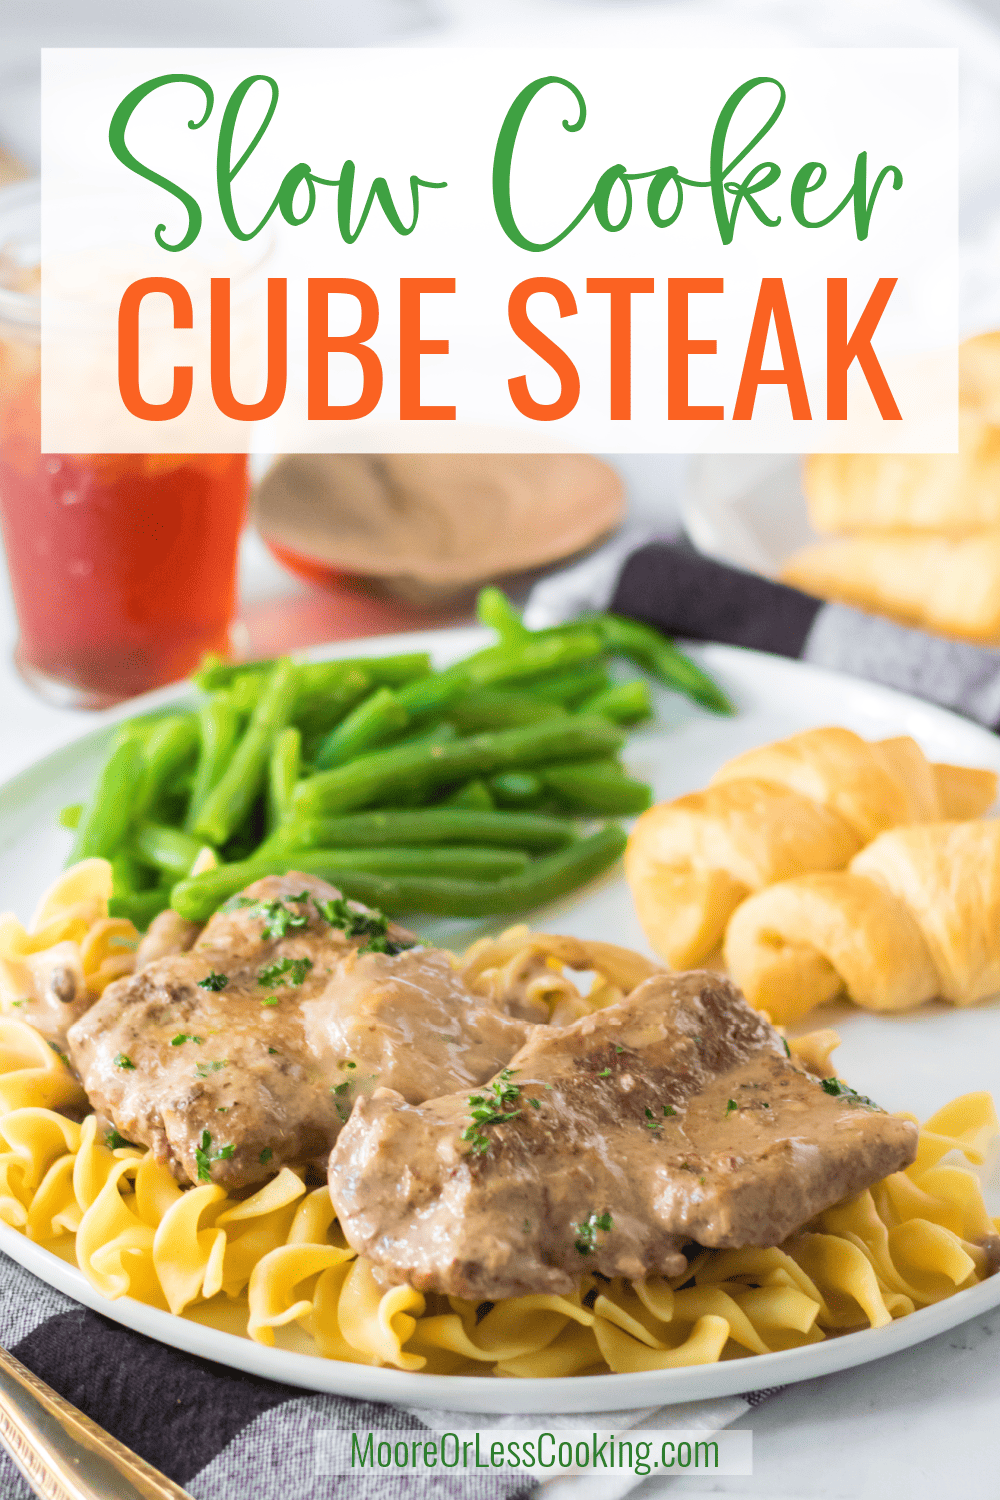 Slow cooker meals are always a favorite and this Slow Cooker Cube Steak is amazing! Just 5 ingredients cube steak, onions, beefy onion soup, cream of mushroom, and butter and you have a flavorful, tender cube steak that makes its own gravy that is perfect over mashed potatoes, noodles, or even rice. It is a real crowd-pleasing family favorite and great for these upcoming chilly Fall nights. via @Mooreorlesscook